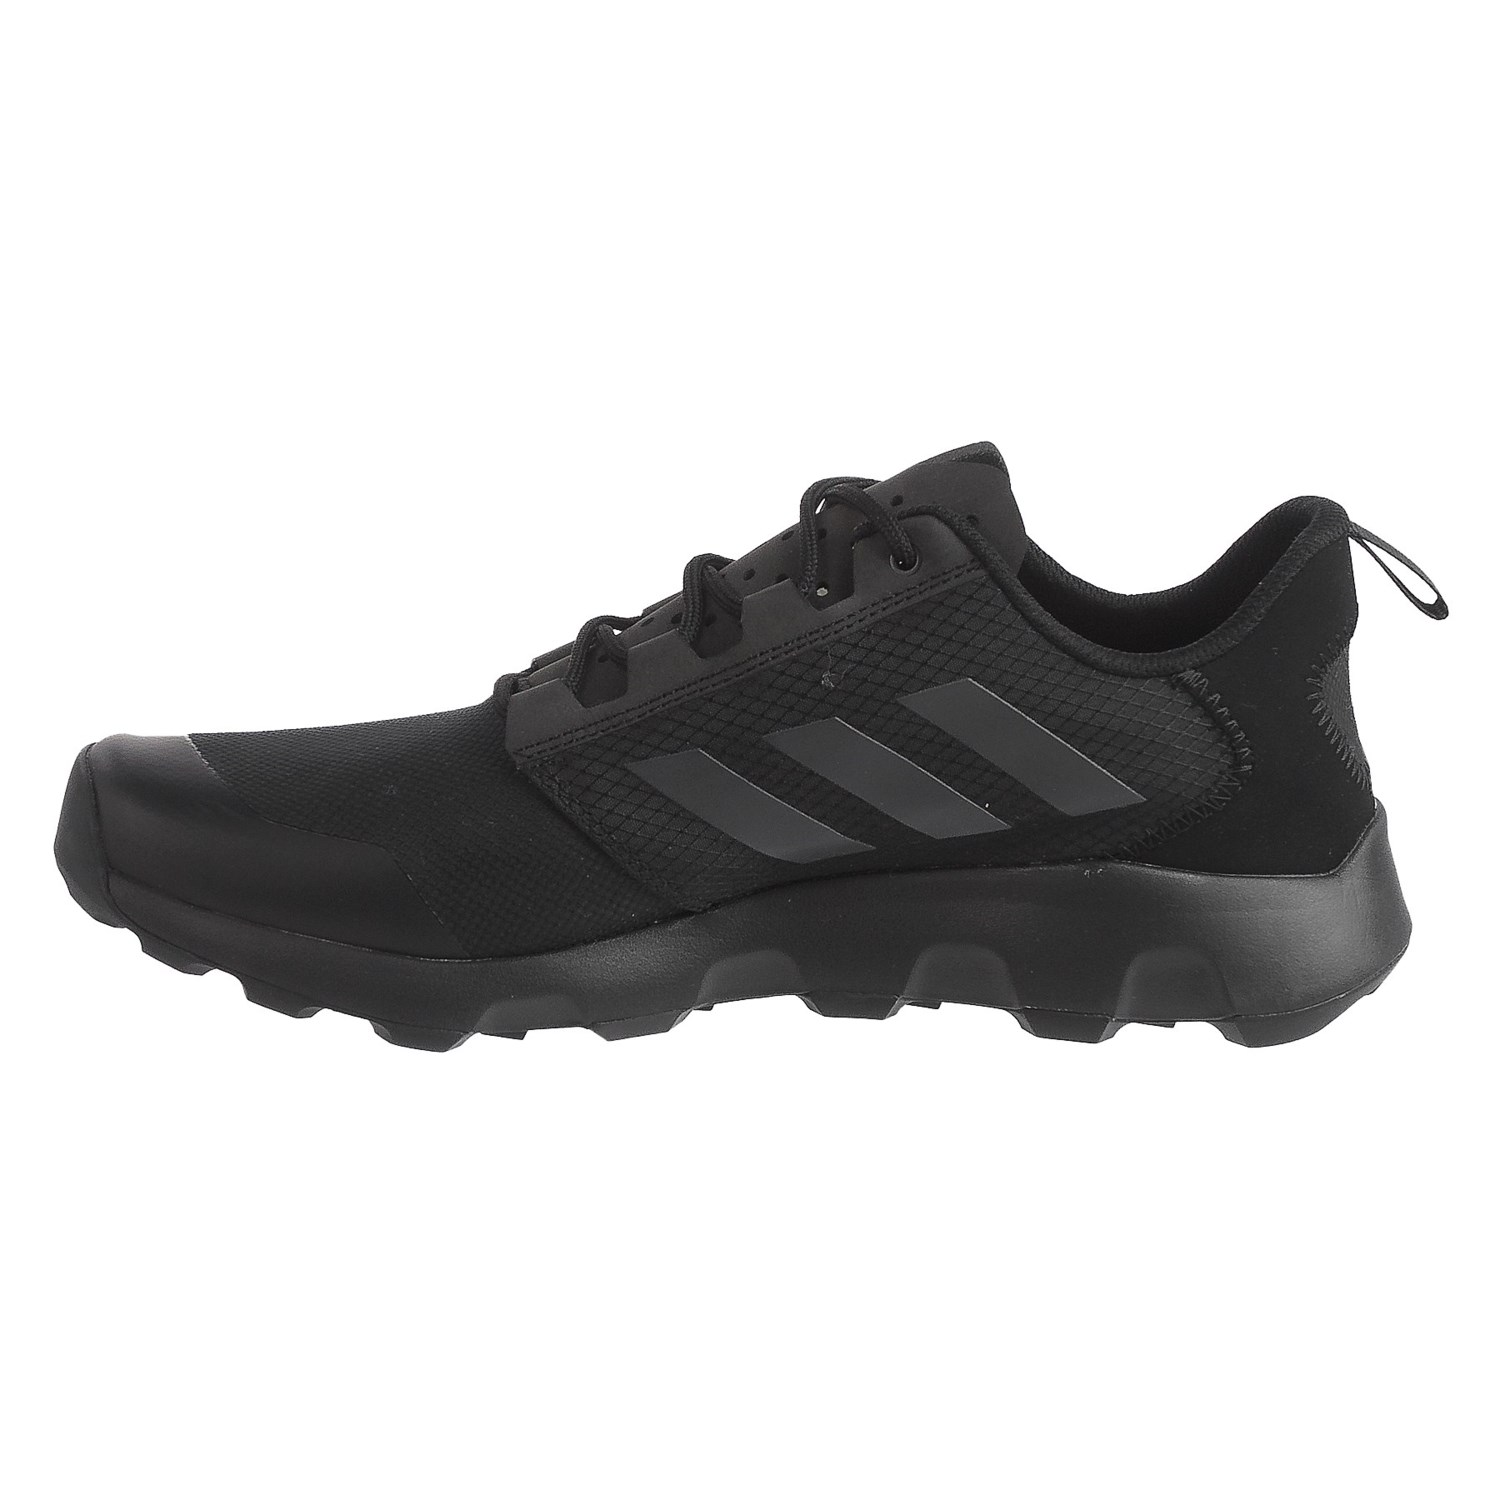 adidas Terrex Voyager DLX Trail Running Shoes (For Men) - Save 33%